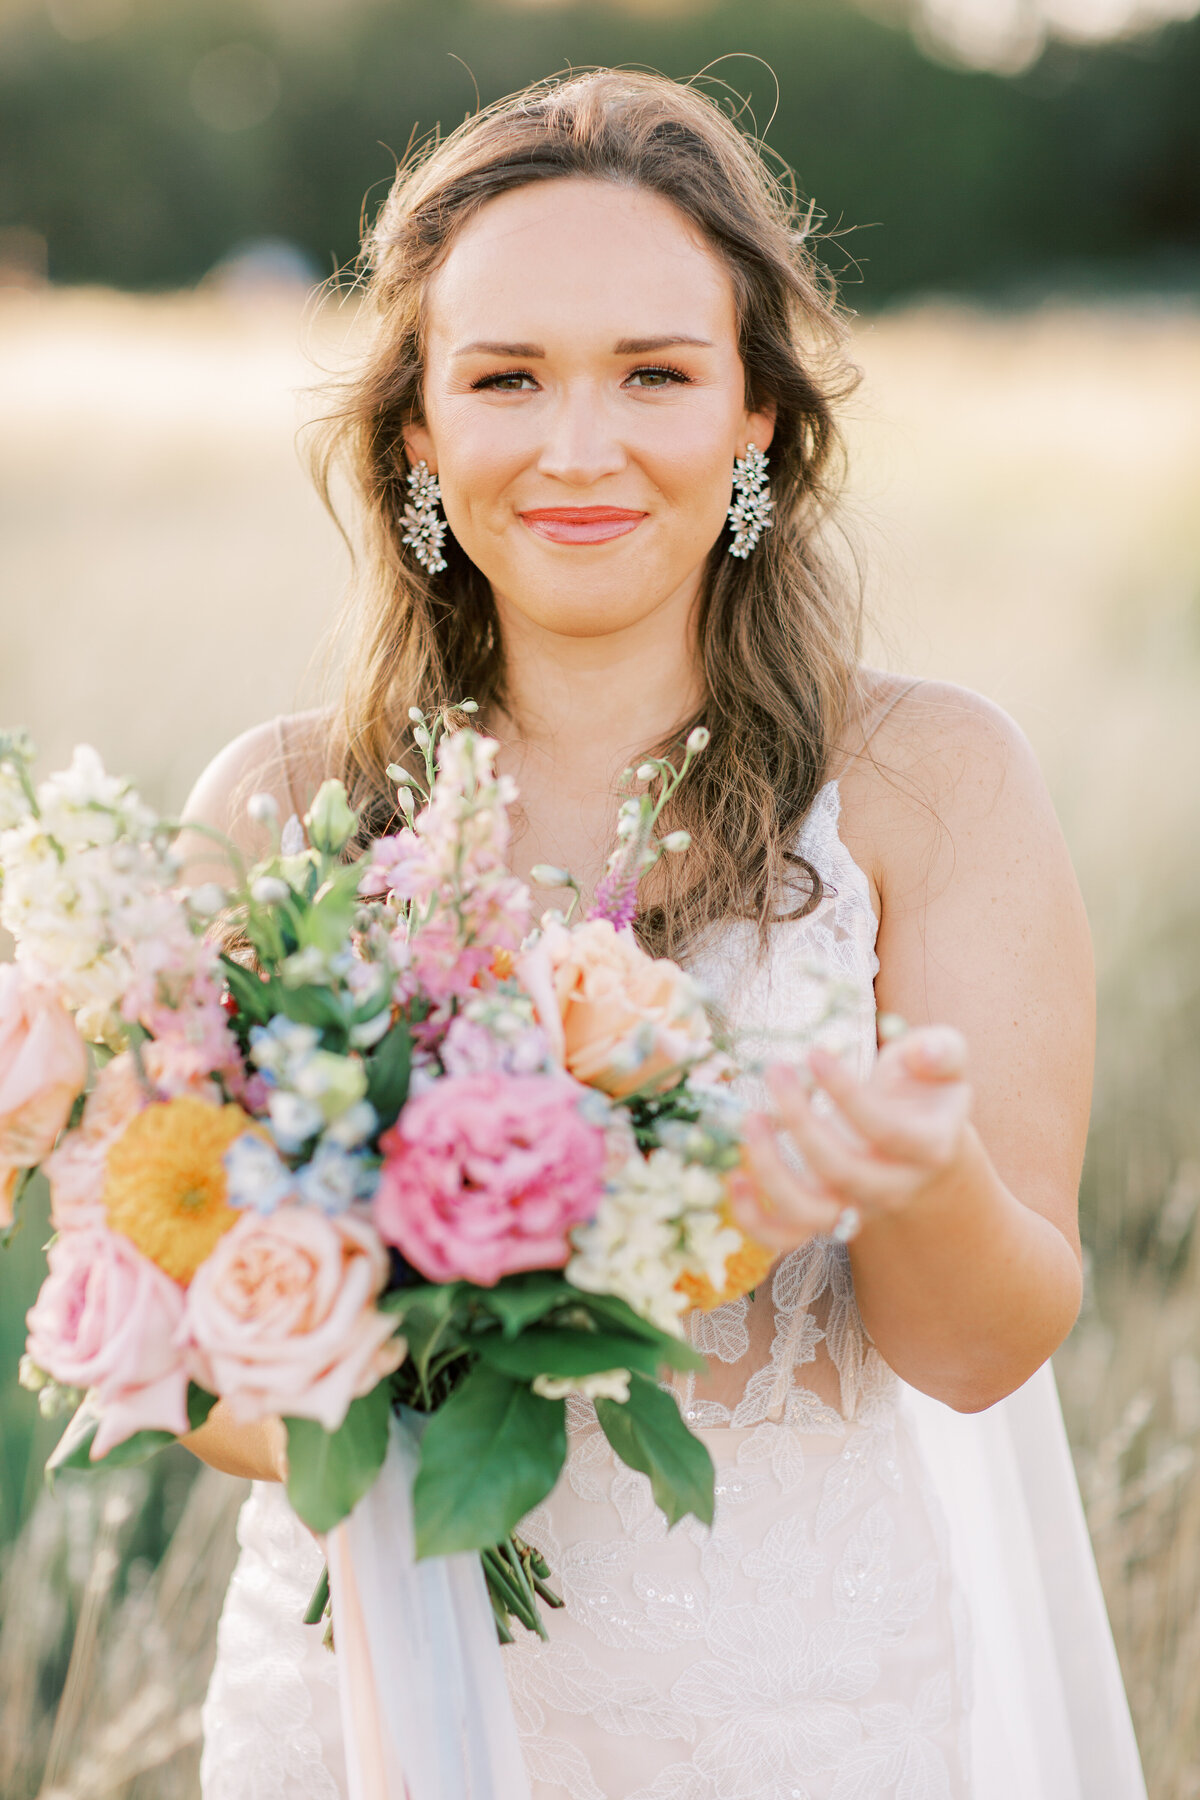 Best Wedding Photographer in Victoria, Texas: Jenny King | Fine art and luxury destination wedding photographer located in south Texas.